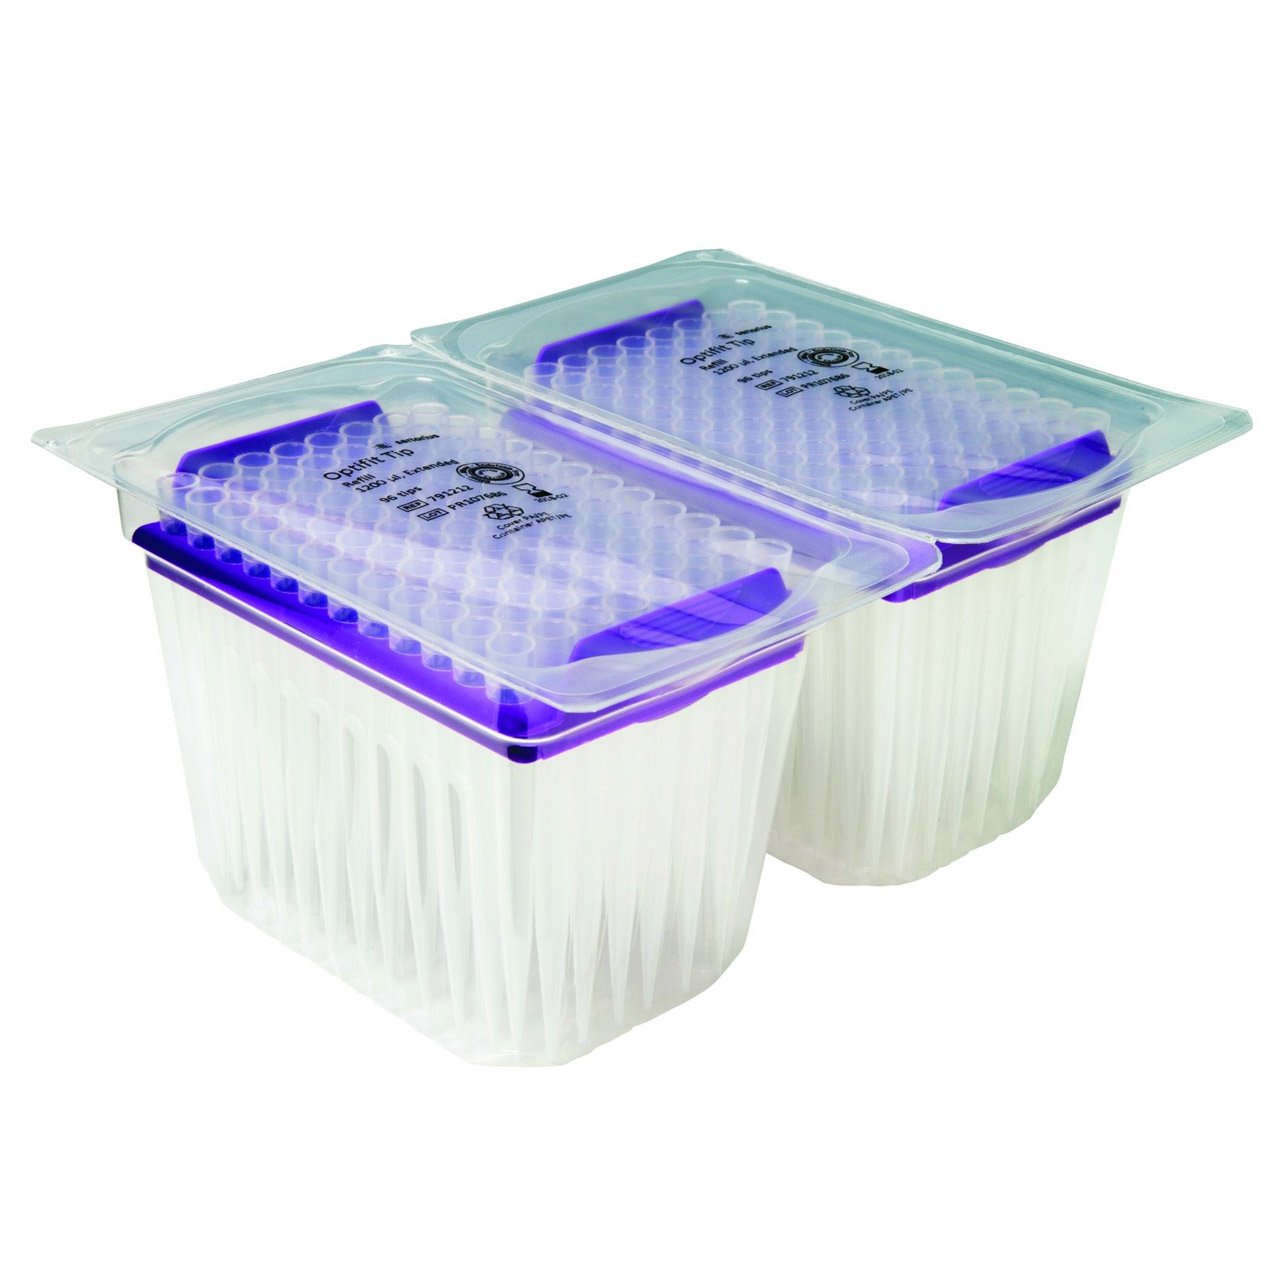 Tip 1200 ul,Exended, Refill Pack (10x96) Sterile